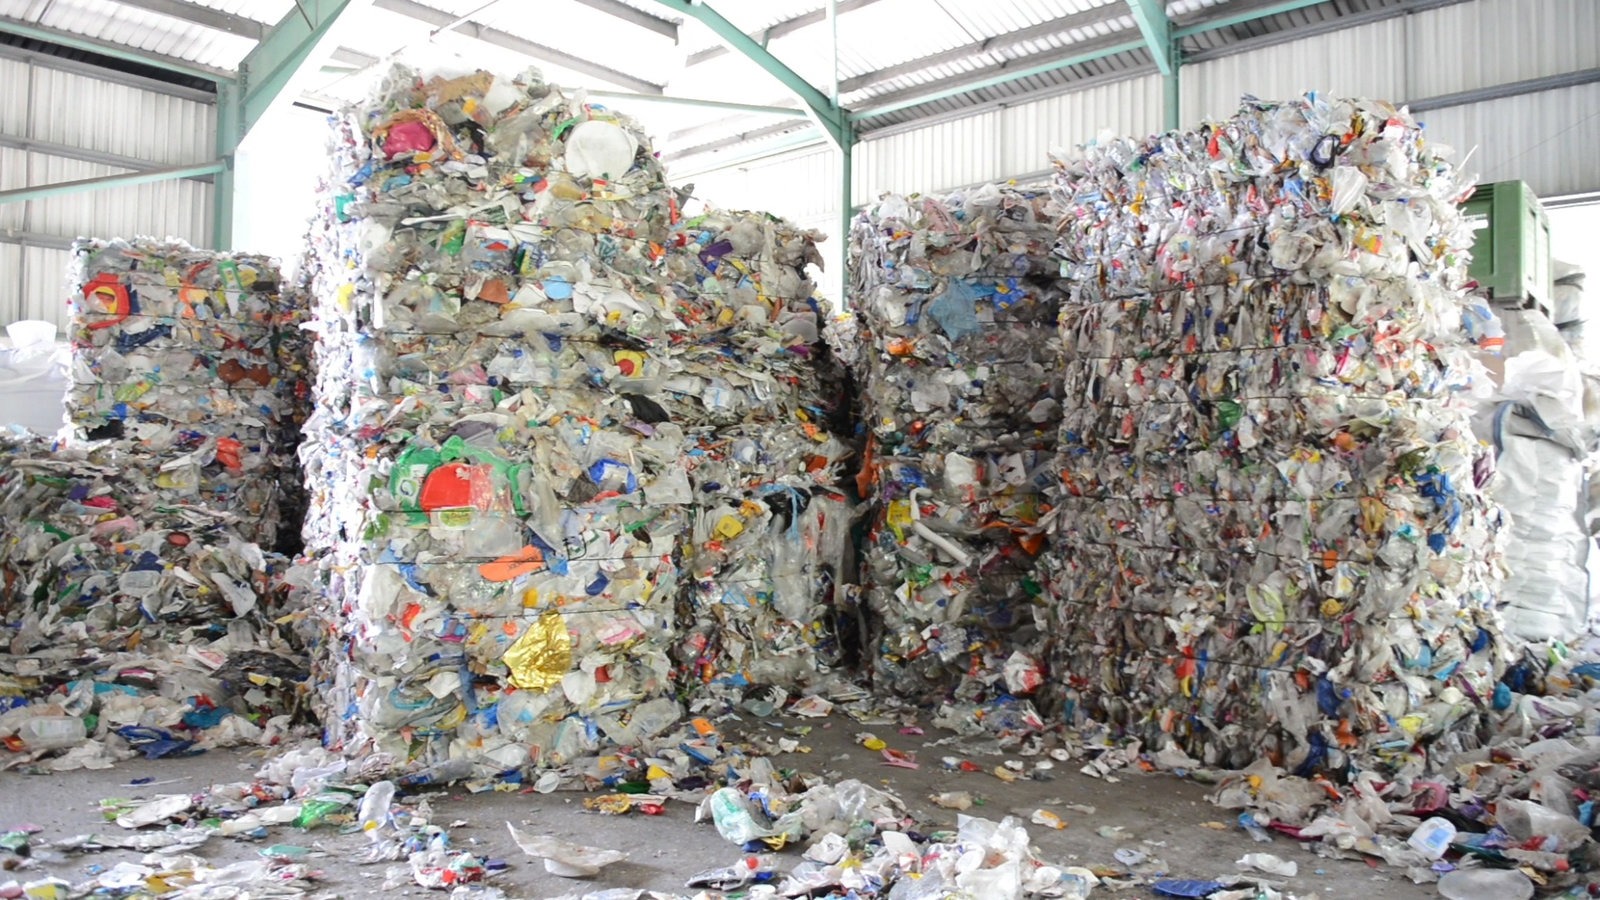 Collected material, including plastic, is baled at TerraCycle. Courtesy of TerraCycle